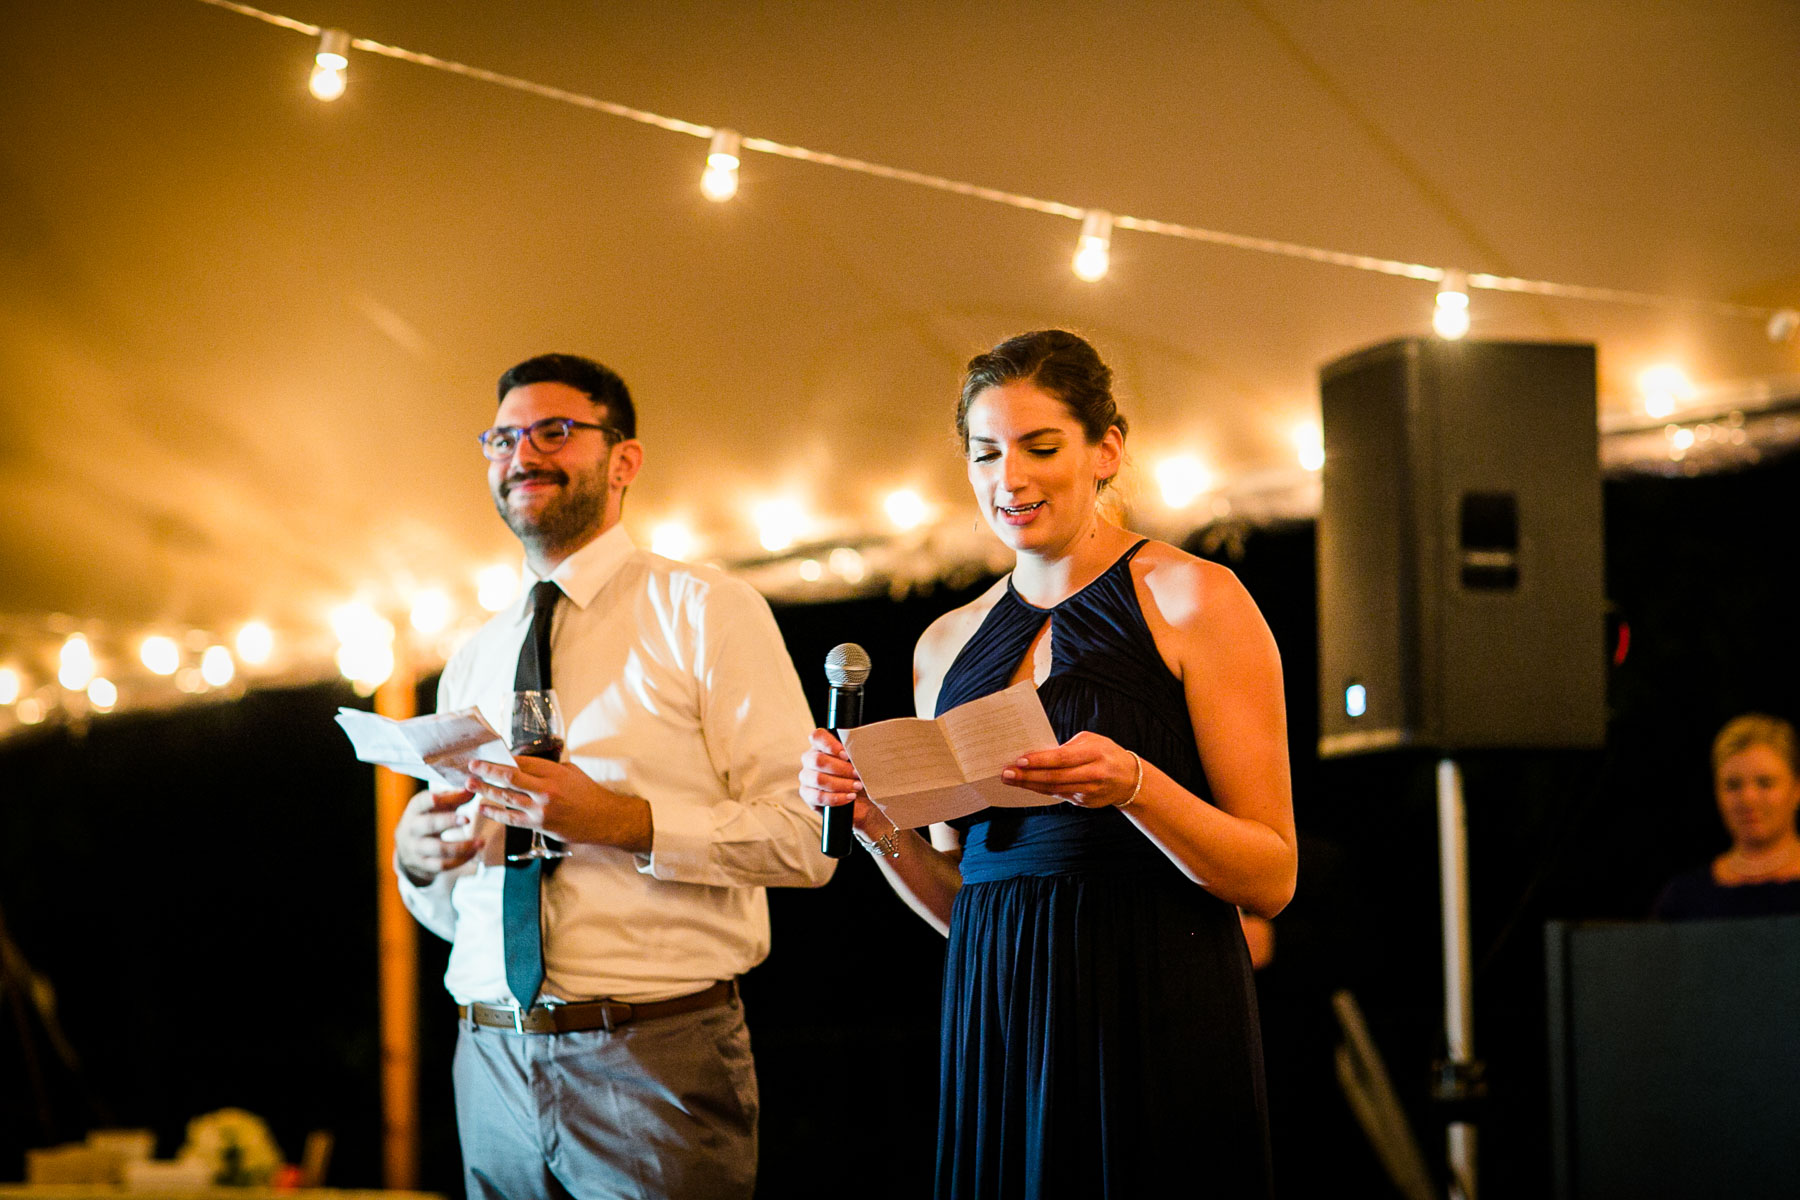 The_Connors_Center_Wedding_Dan_Aguirre_Photography_099